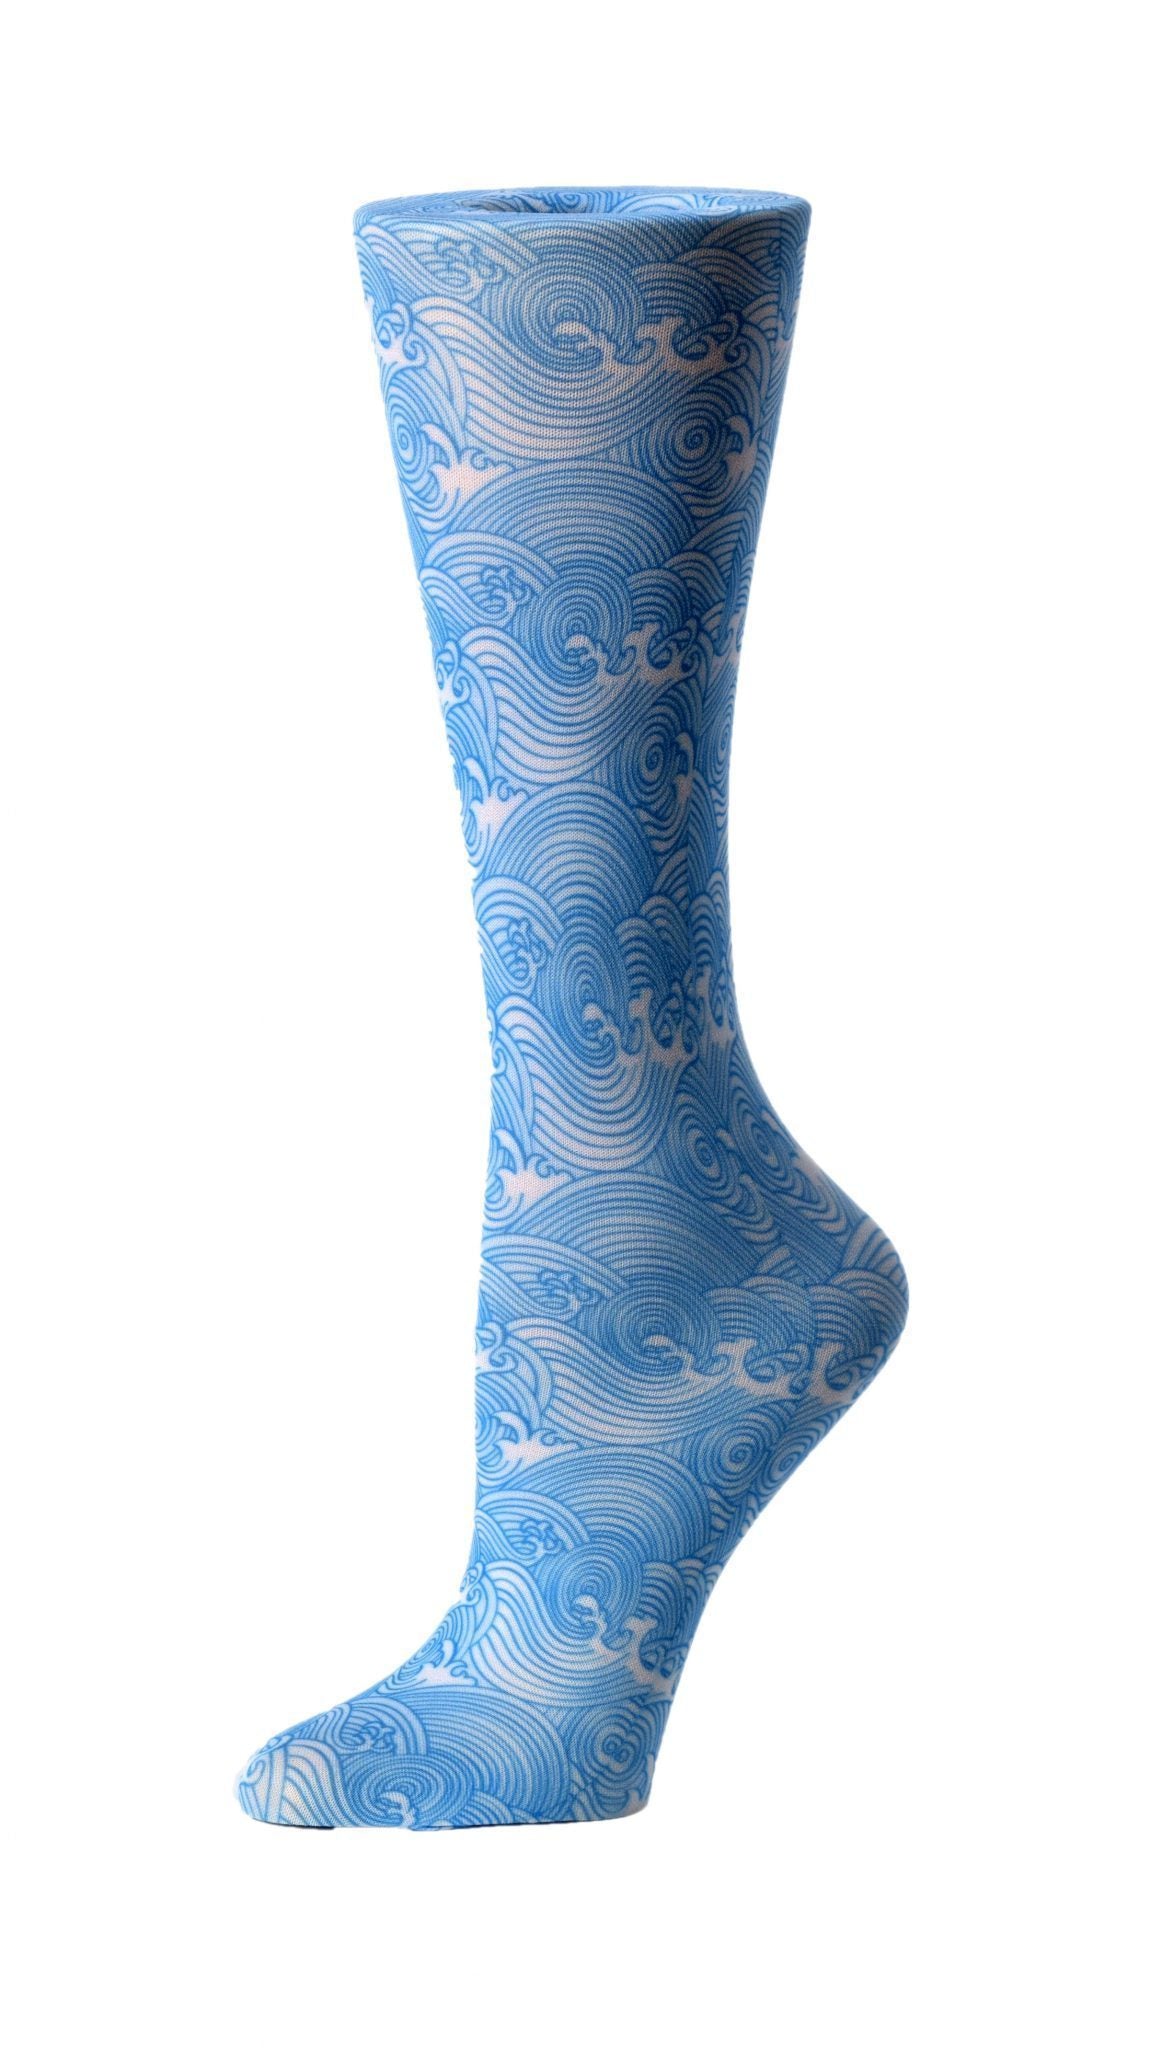 Cutieful Moderate Compression Socks 10-18 MMhg Wide Calf Knit Print Pattern Ocean Waves at Parker's Clothing and Shoes.